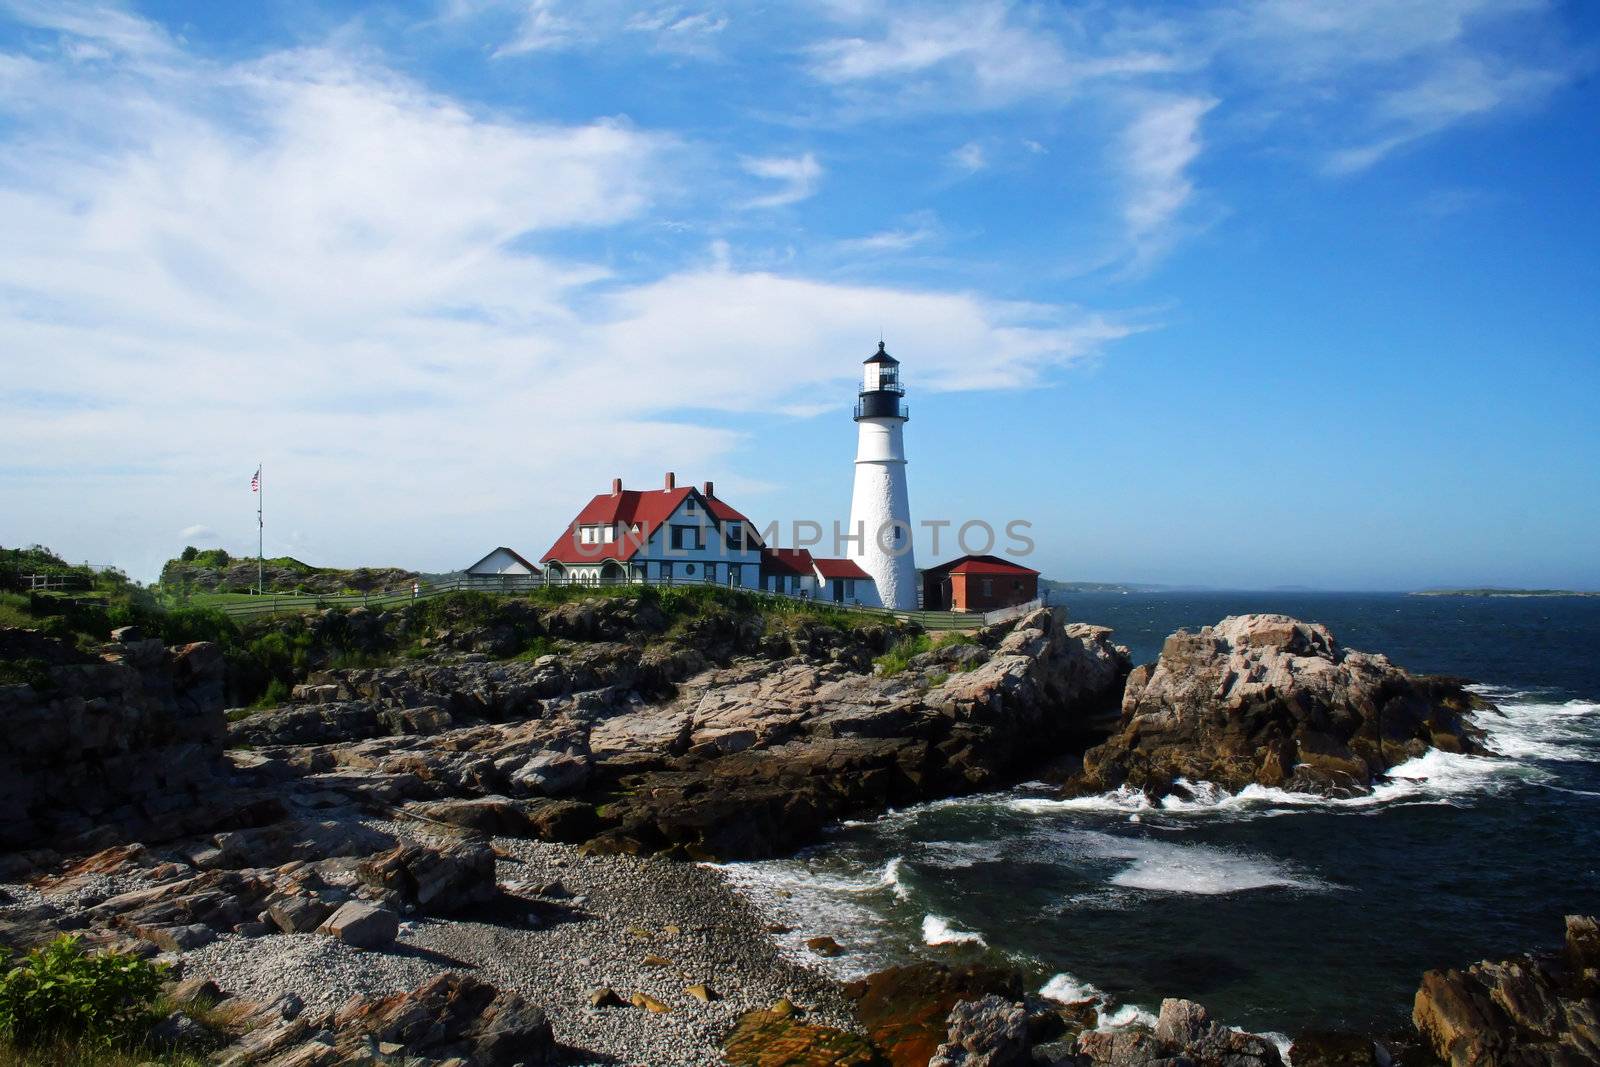 The Portland Head Lighthouse, located in Maine